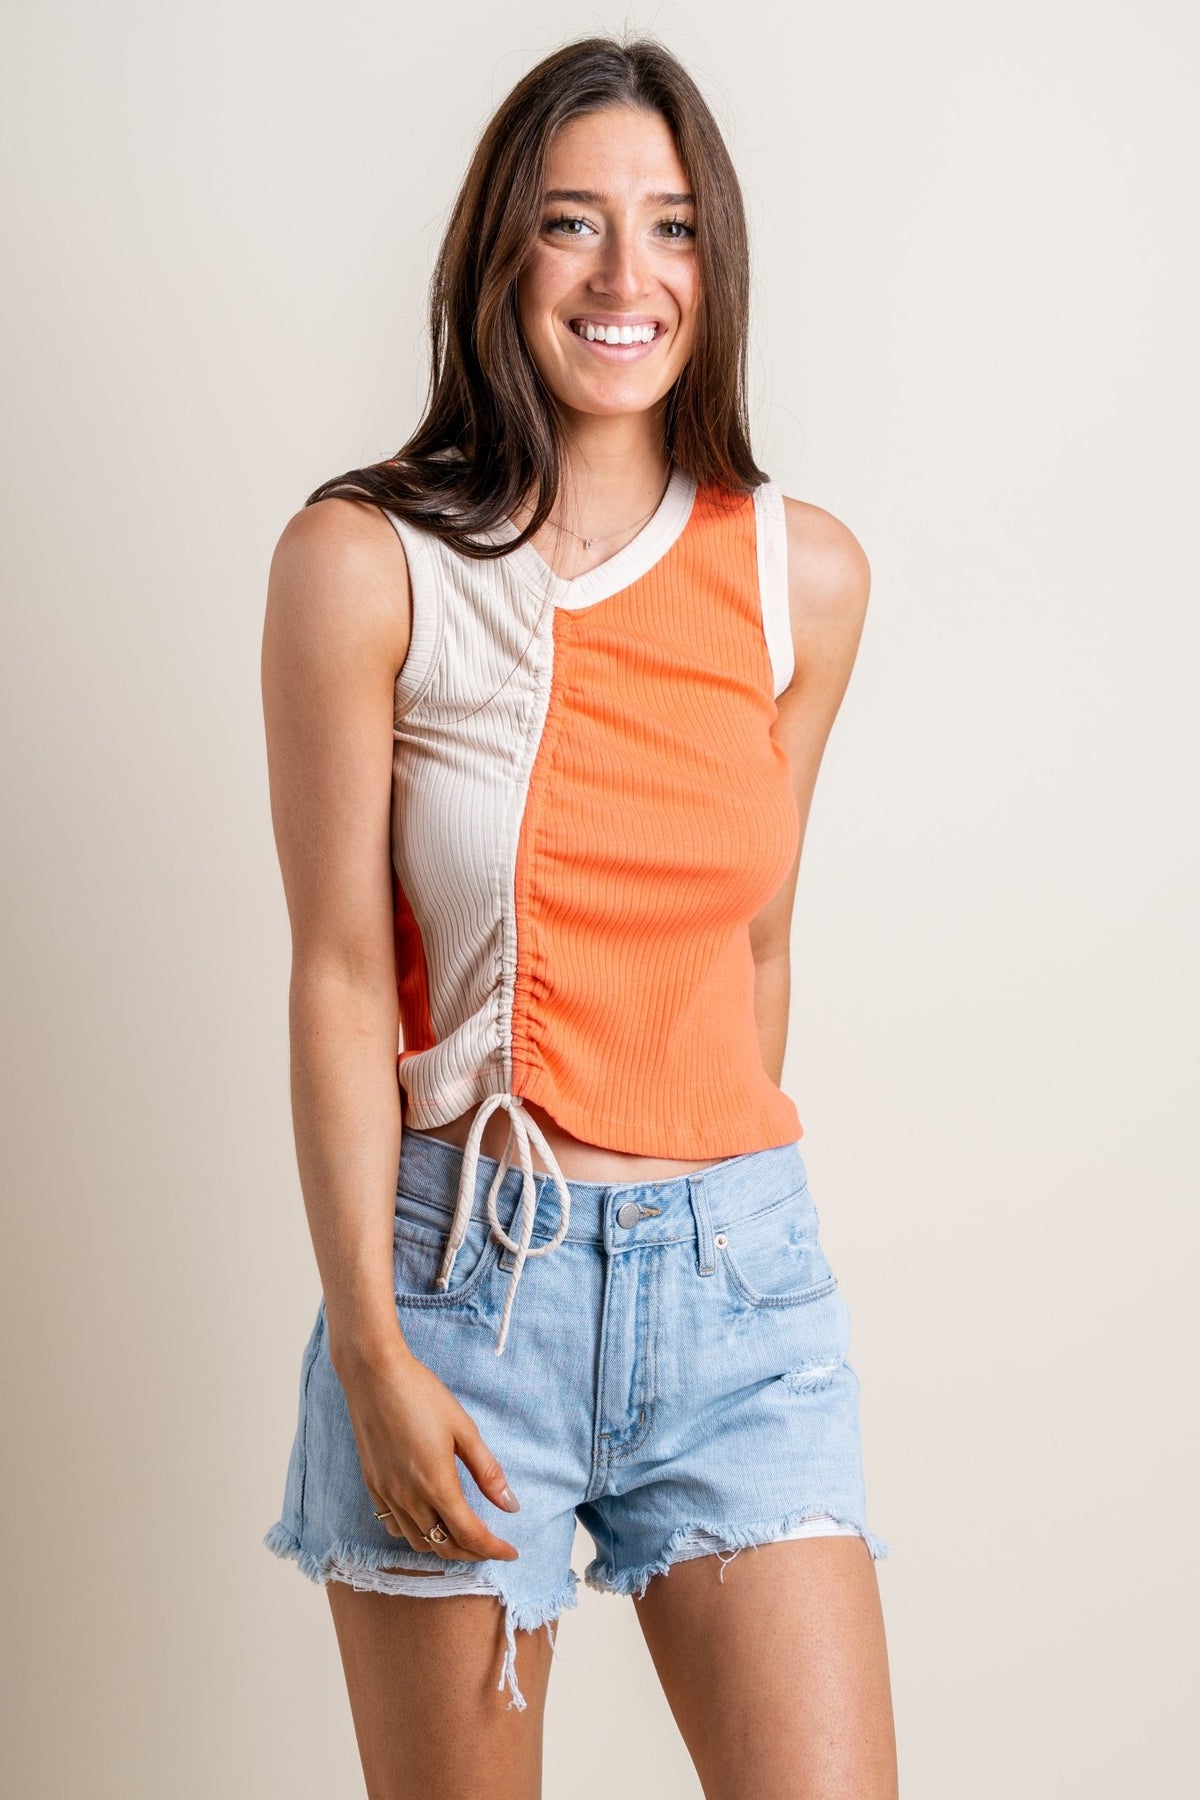 DayDreamer ruched colorblock tank top peach echo - Trendy Band T-Shirts and Sweatshirts at Lush Fashion Lounge Boutique in Oklahoma City